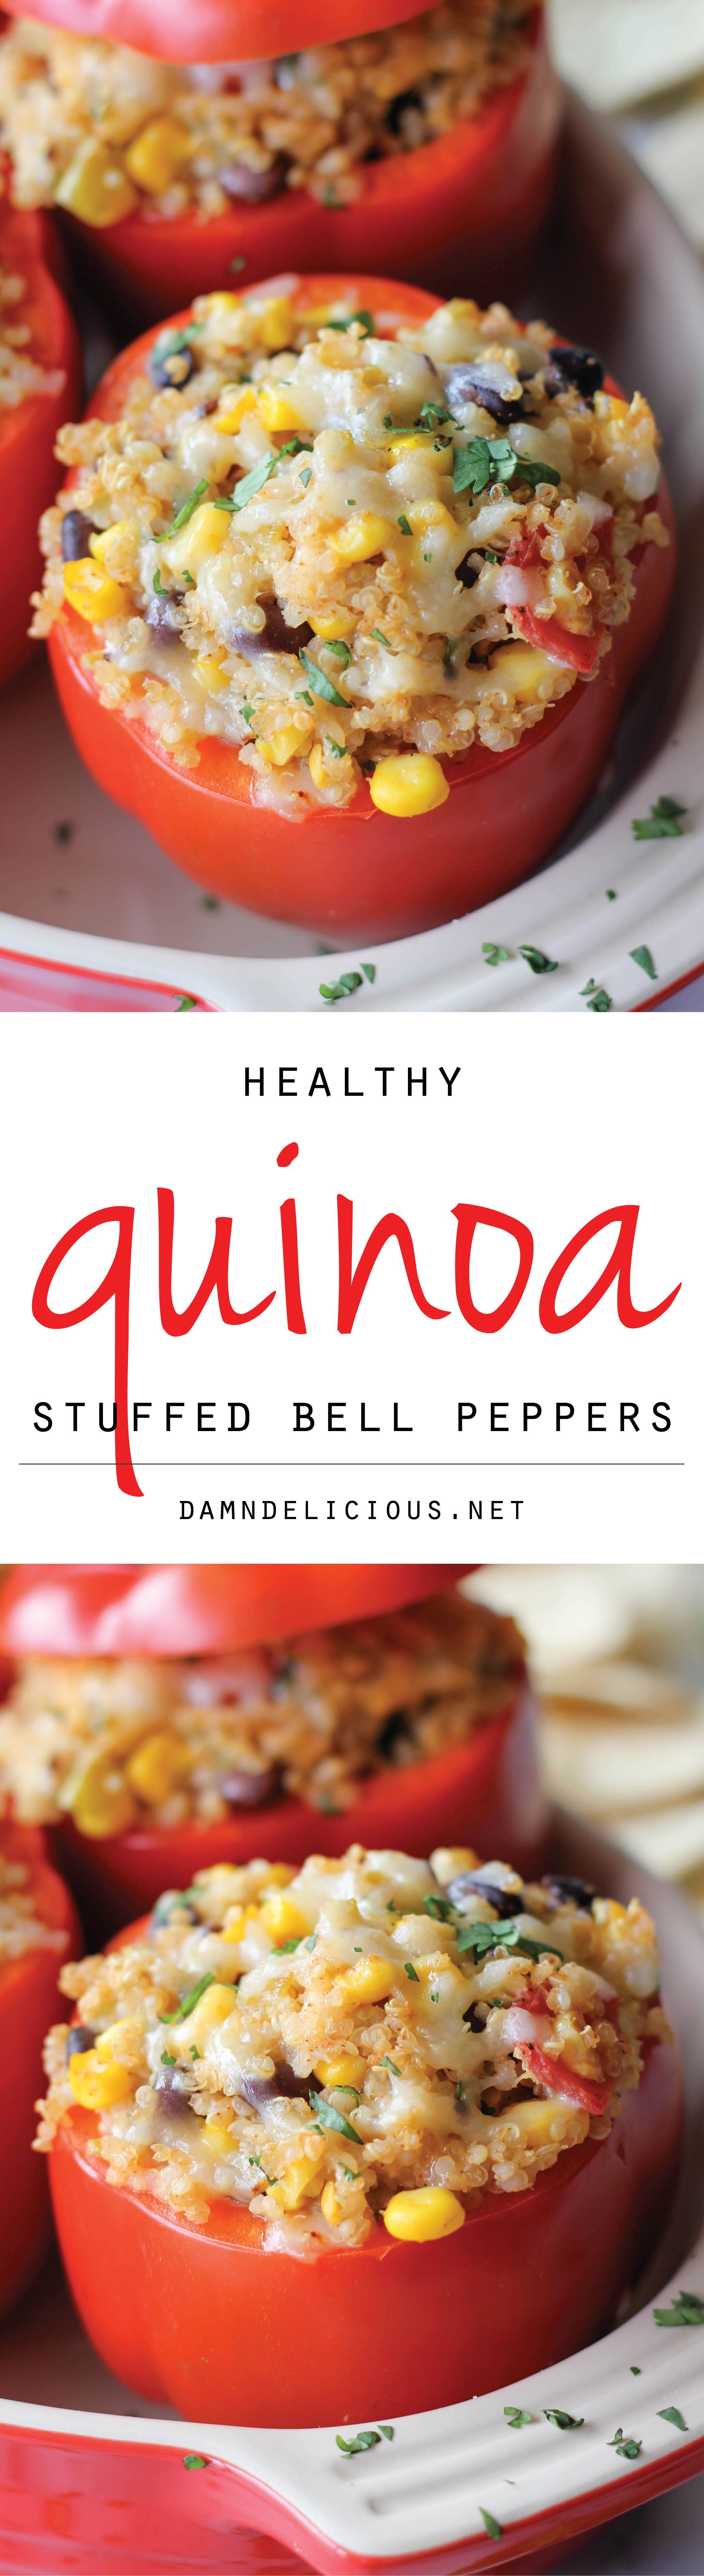 Quinoa Stuffed Bell Peppers – These stuffed bell peppers will provide the nutrition that you need for a healthy, balanced meal!